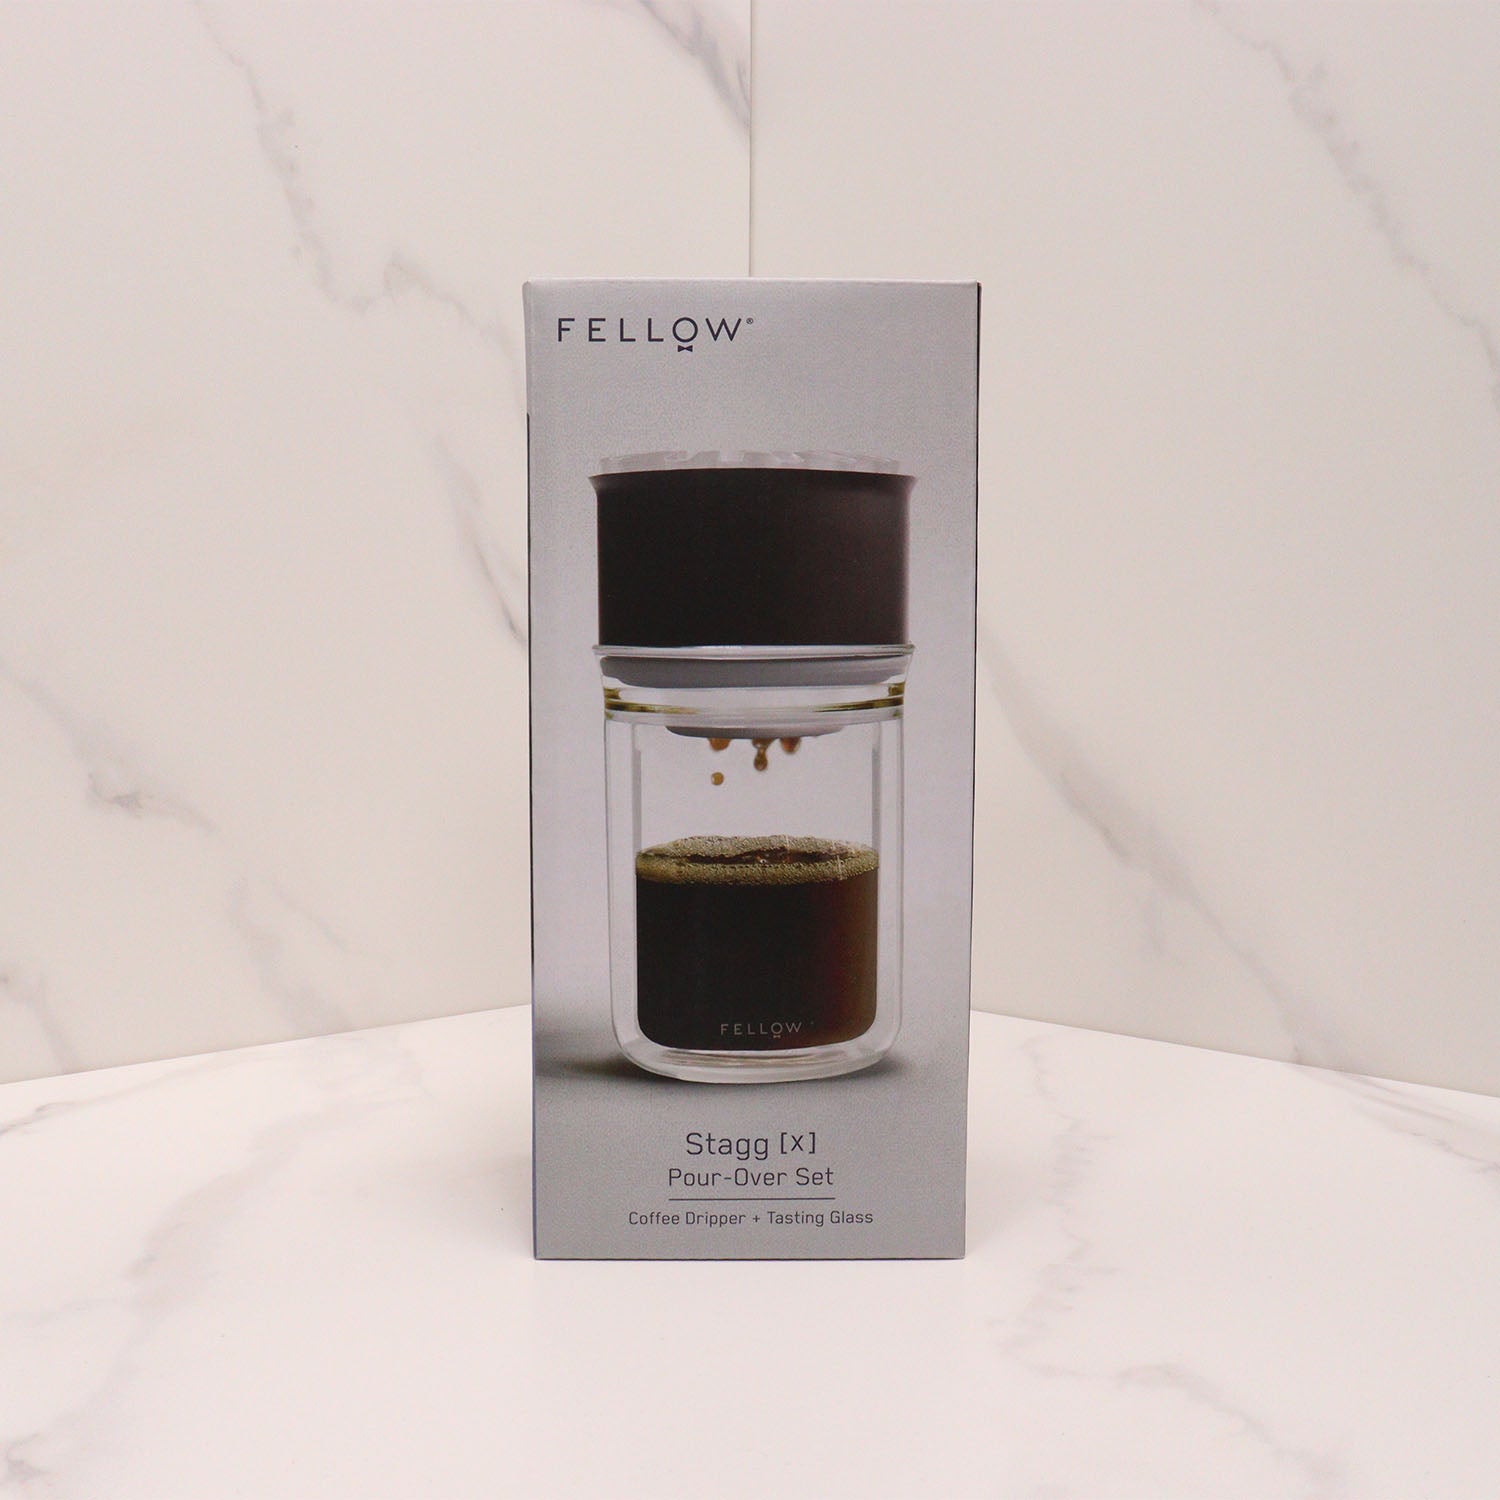 The Fellow Stagg [X] Pourover Set